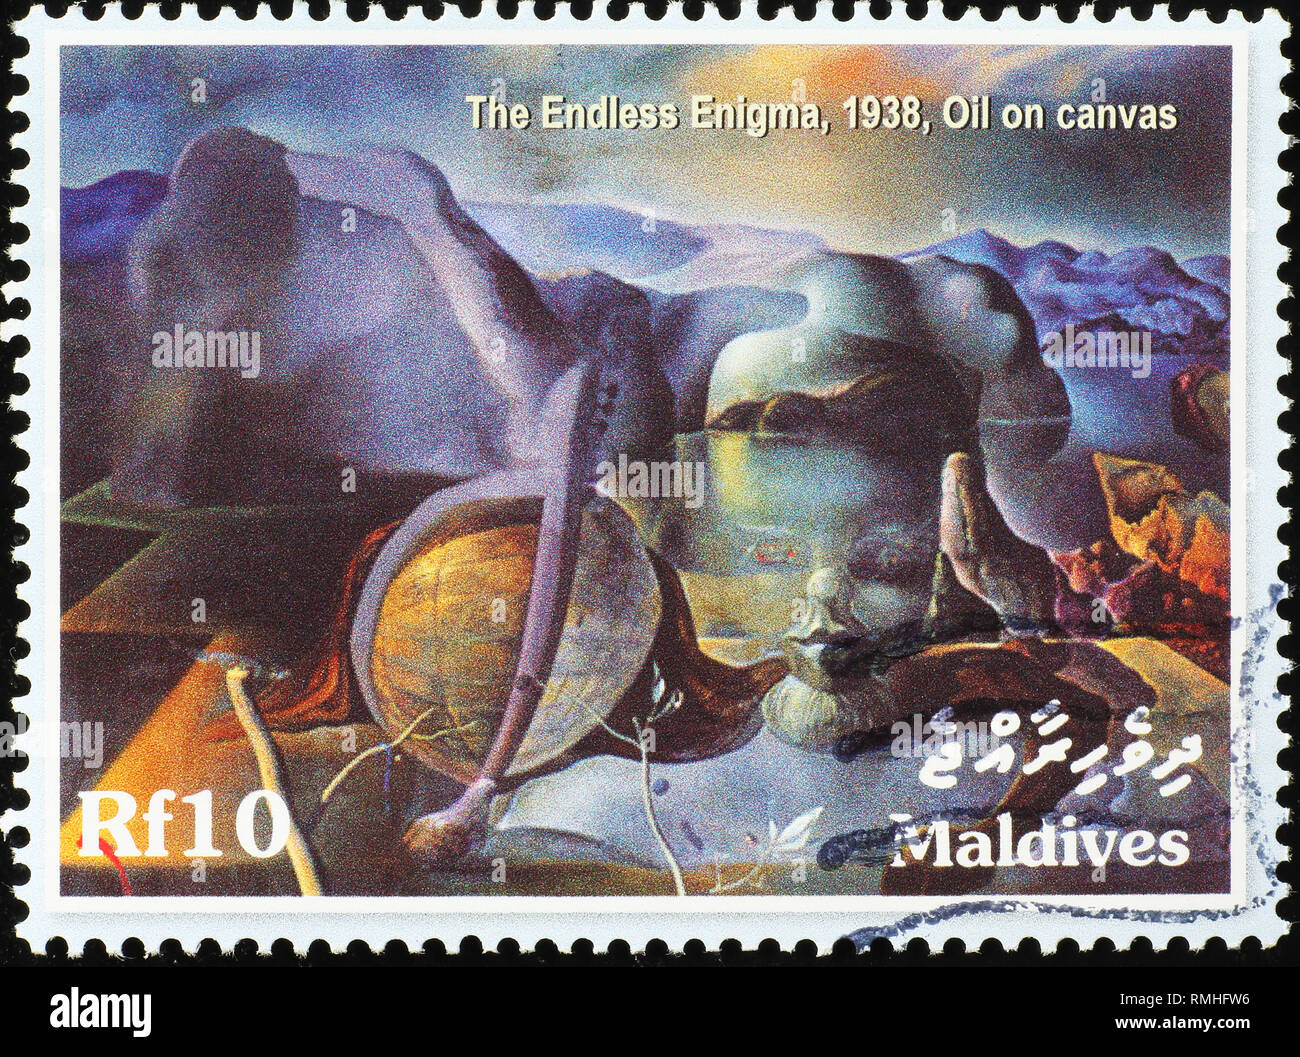 Painting 'the Endless enigma' by Salvador Dalì on stamp Stock Photo